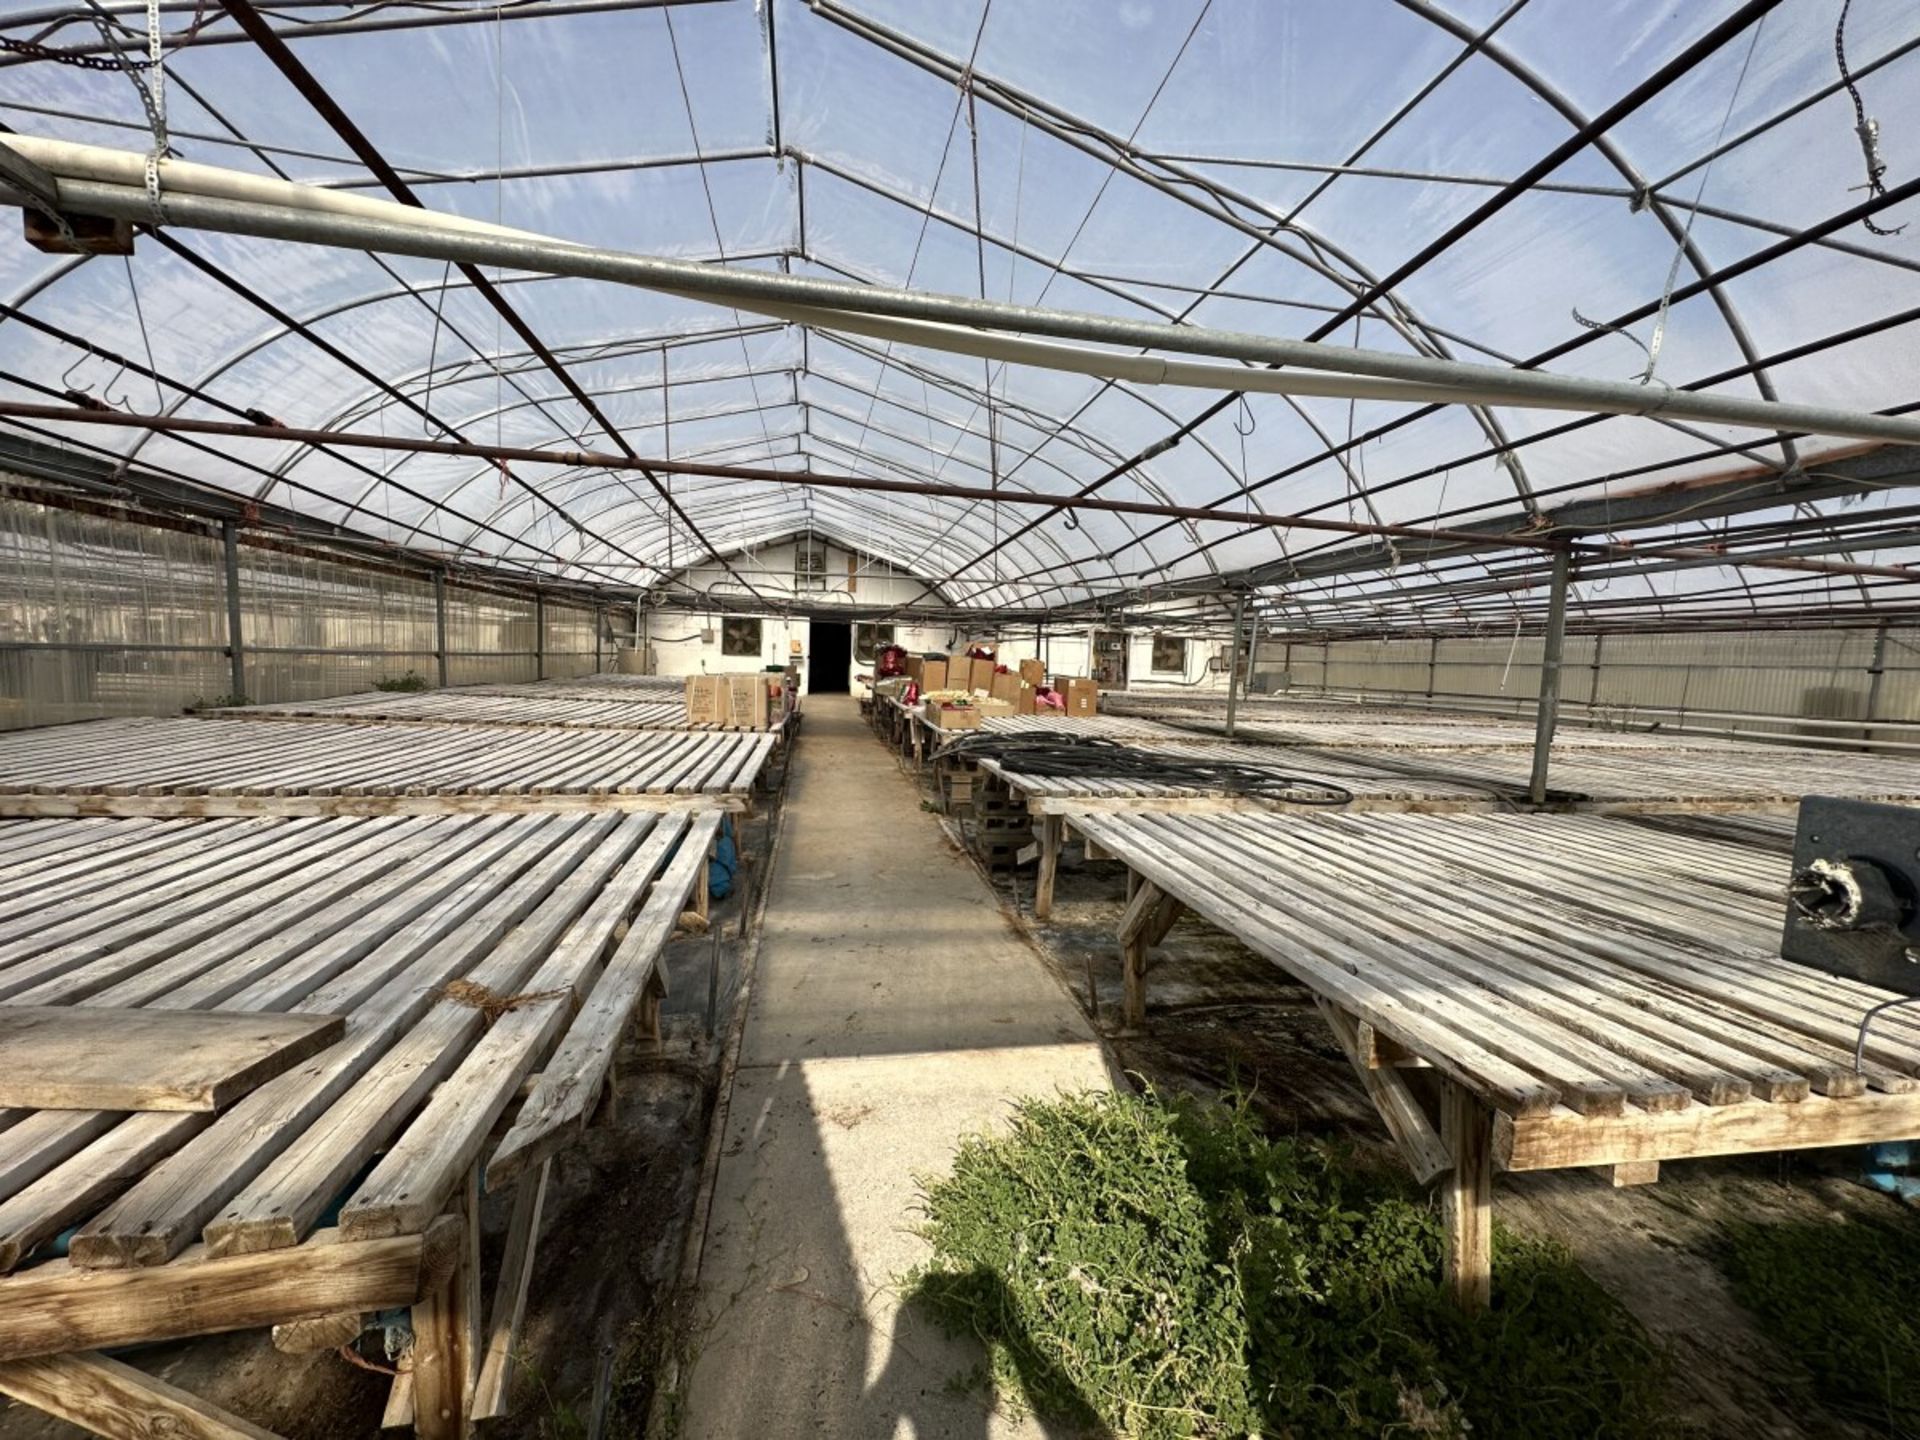 WESTBROOK GUTTER CONNECT 2-BAY GREENHOUSE 60FT X 144FT X 96” H & 2-BAY 60FT X 72 FT X 96”, INCLUDING - Image 12 of 95